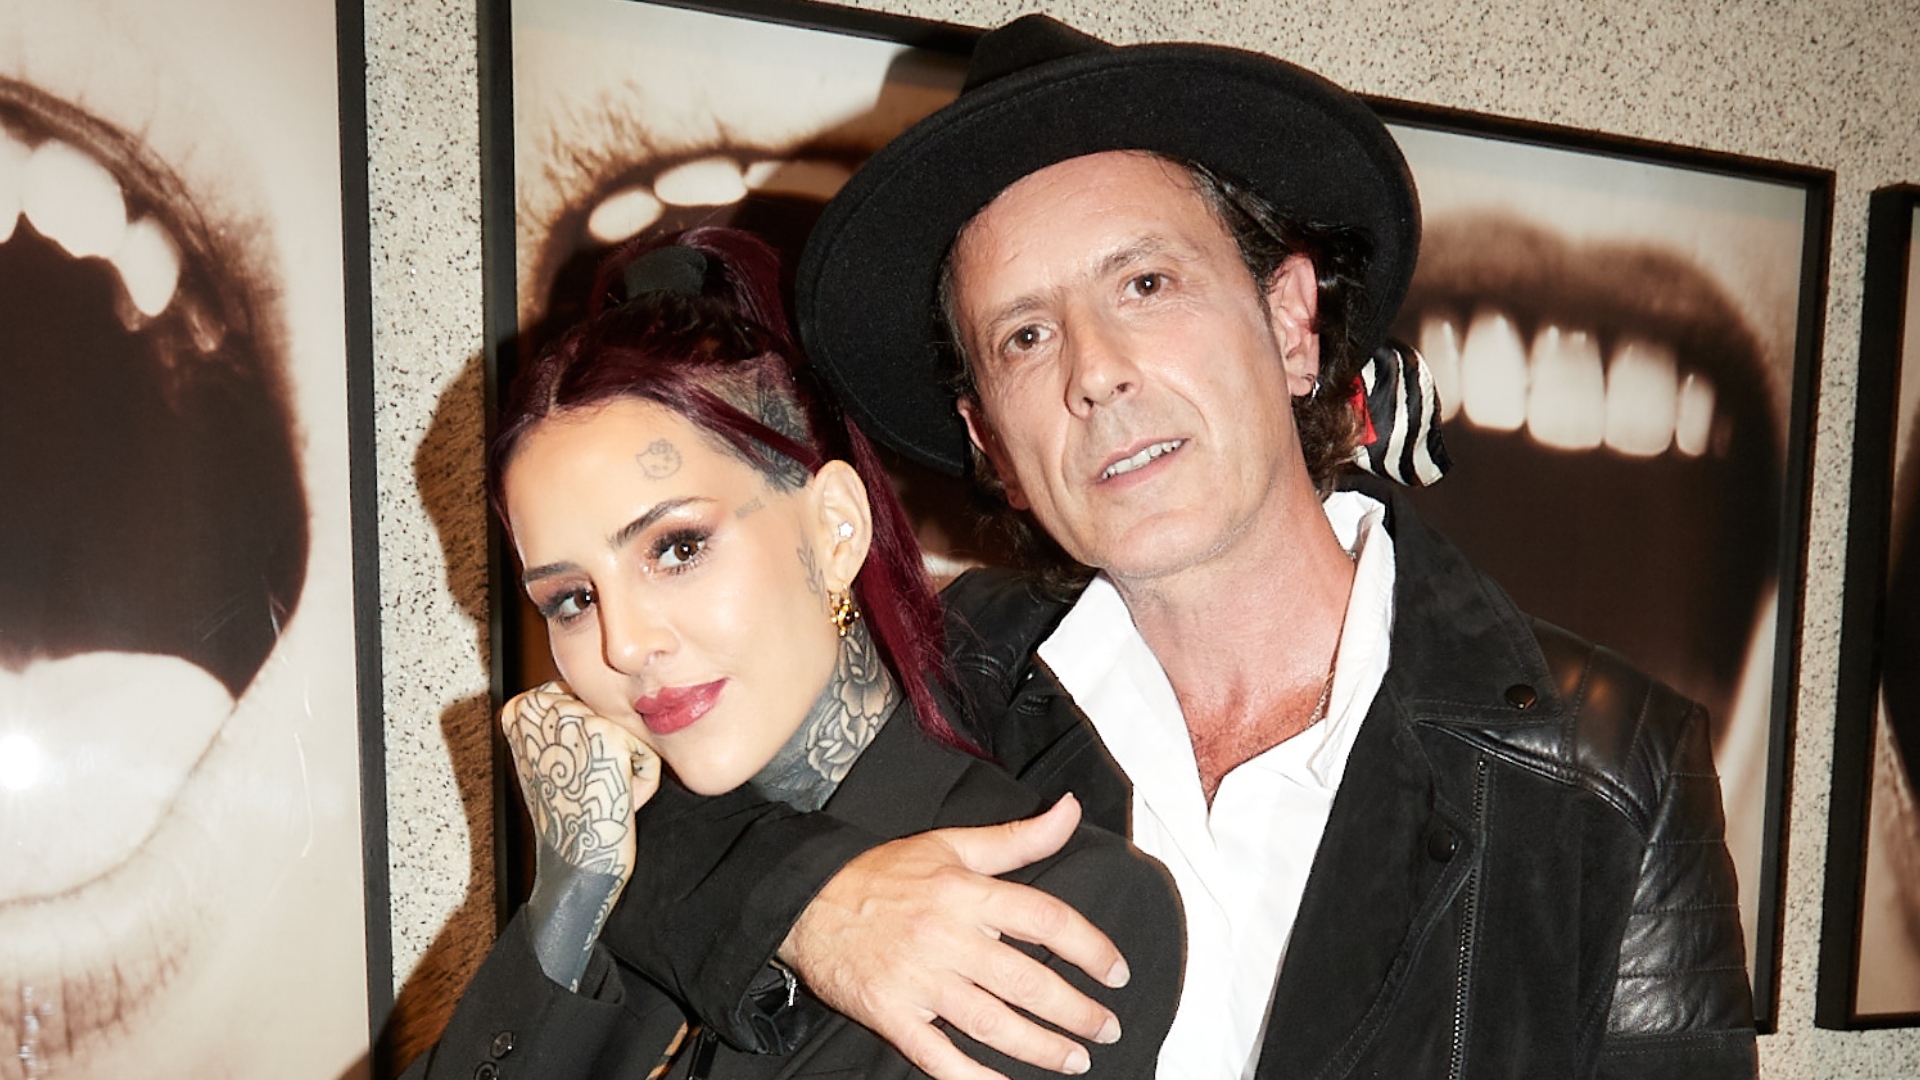 Cande Tinelli And Coti Sorokin, Together Again?